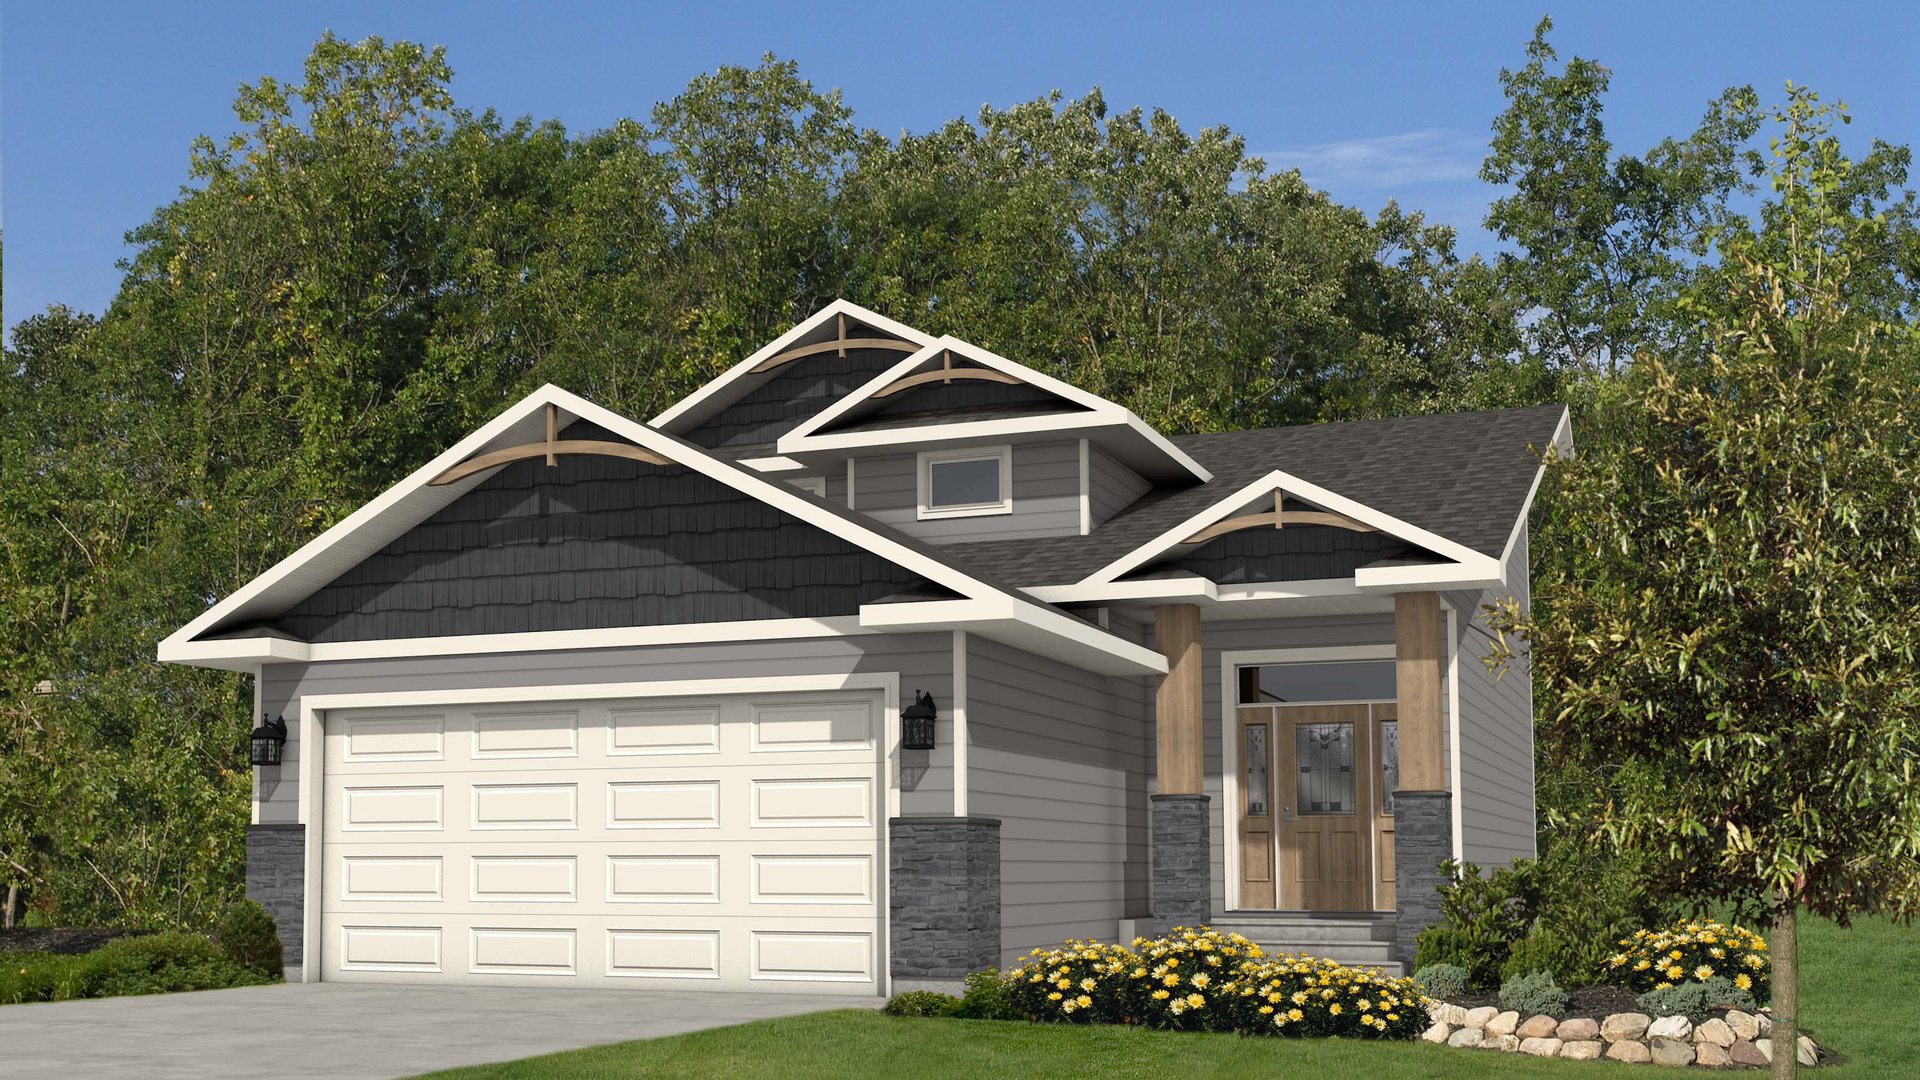 Lethbridge house plan modular homes nelson homes ready to move homes prefabricated home packages.jpg